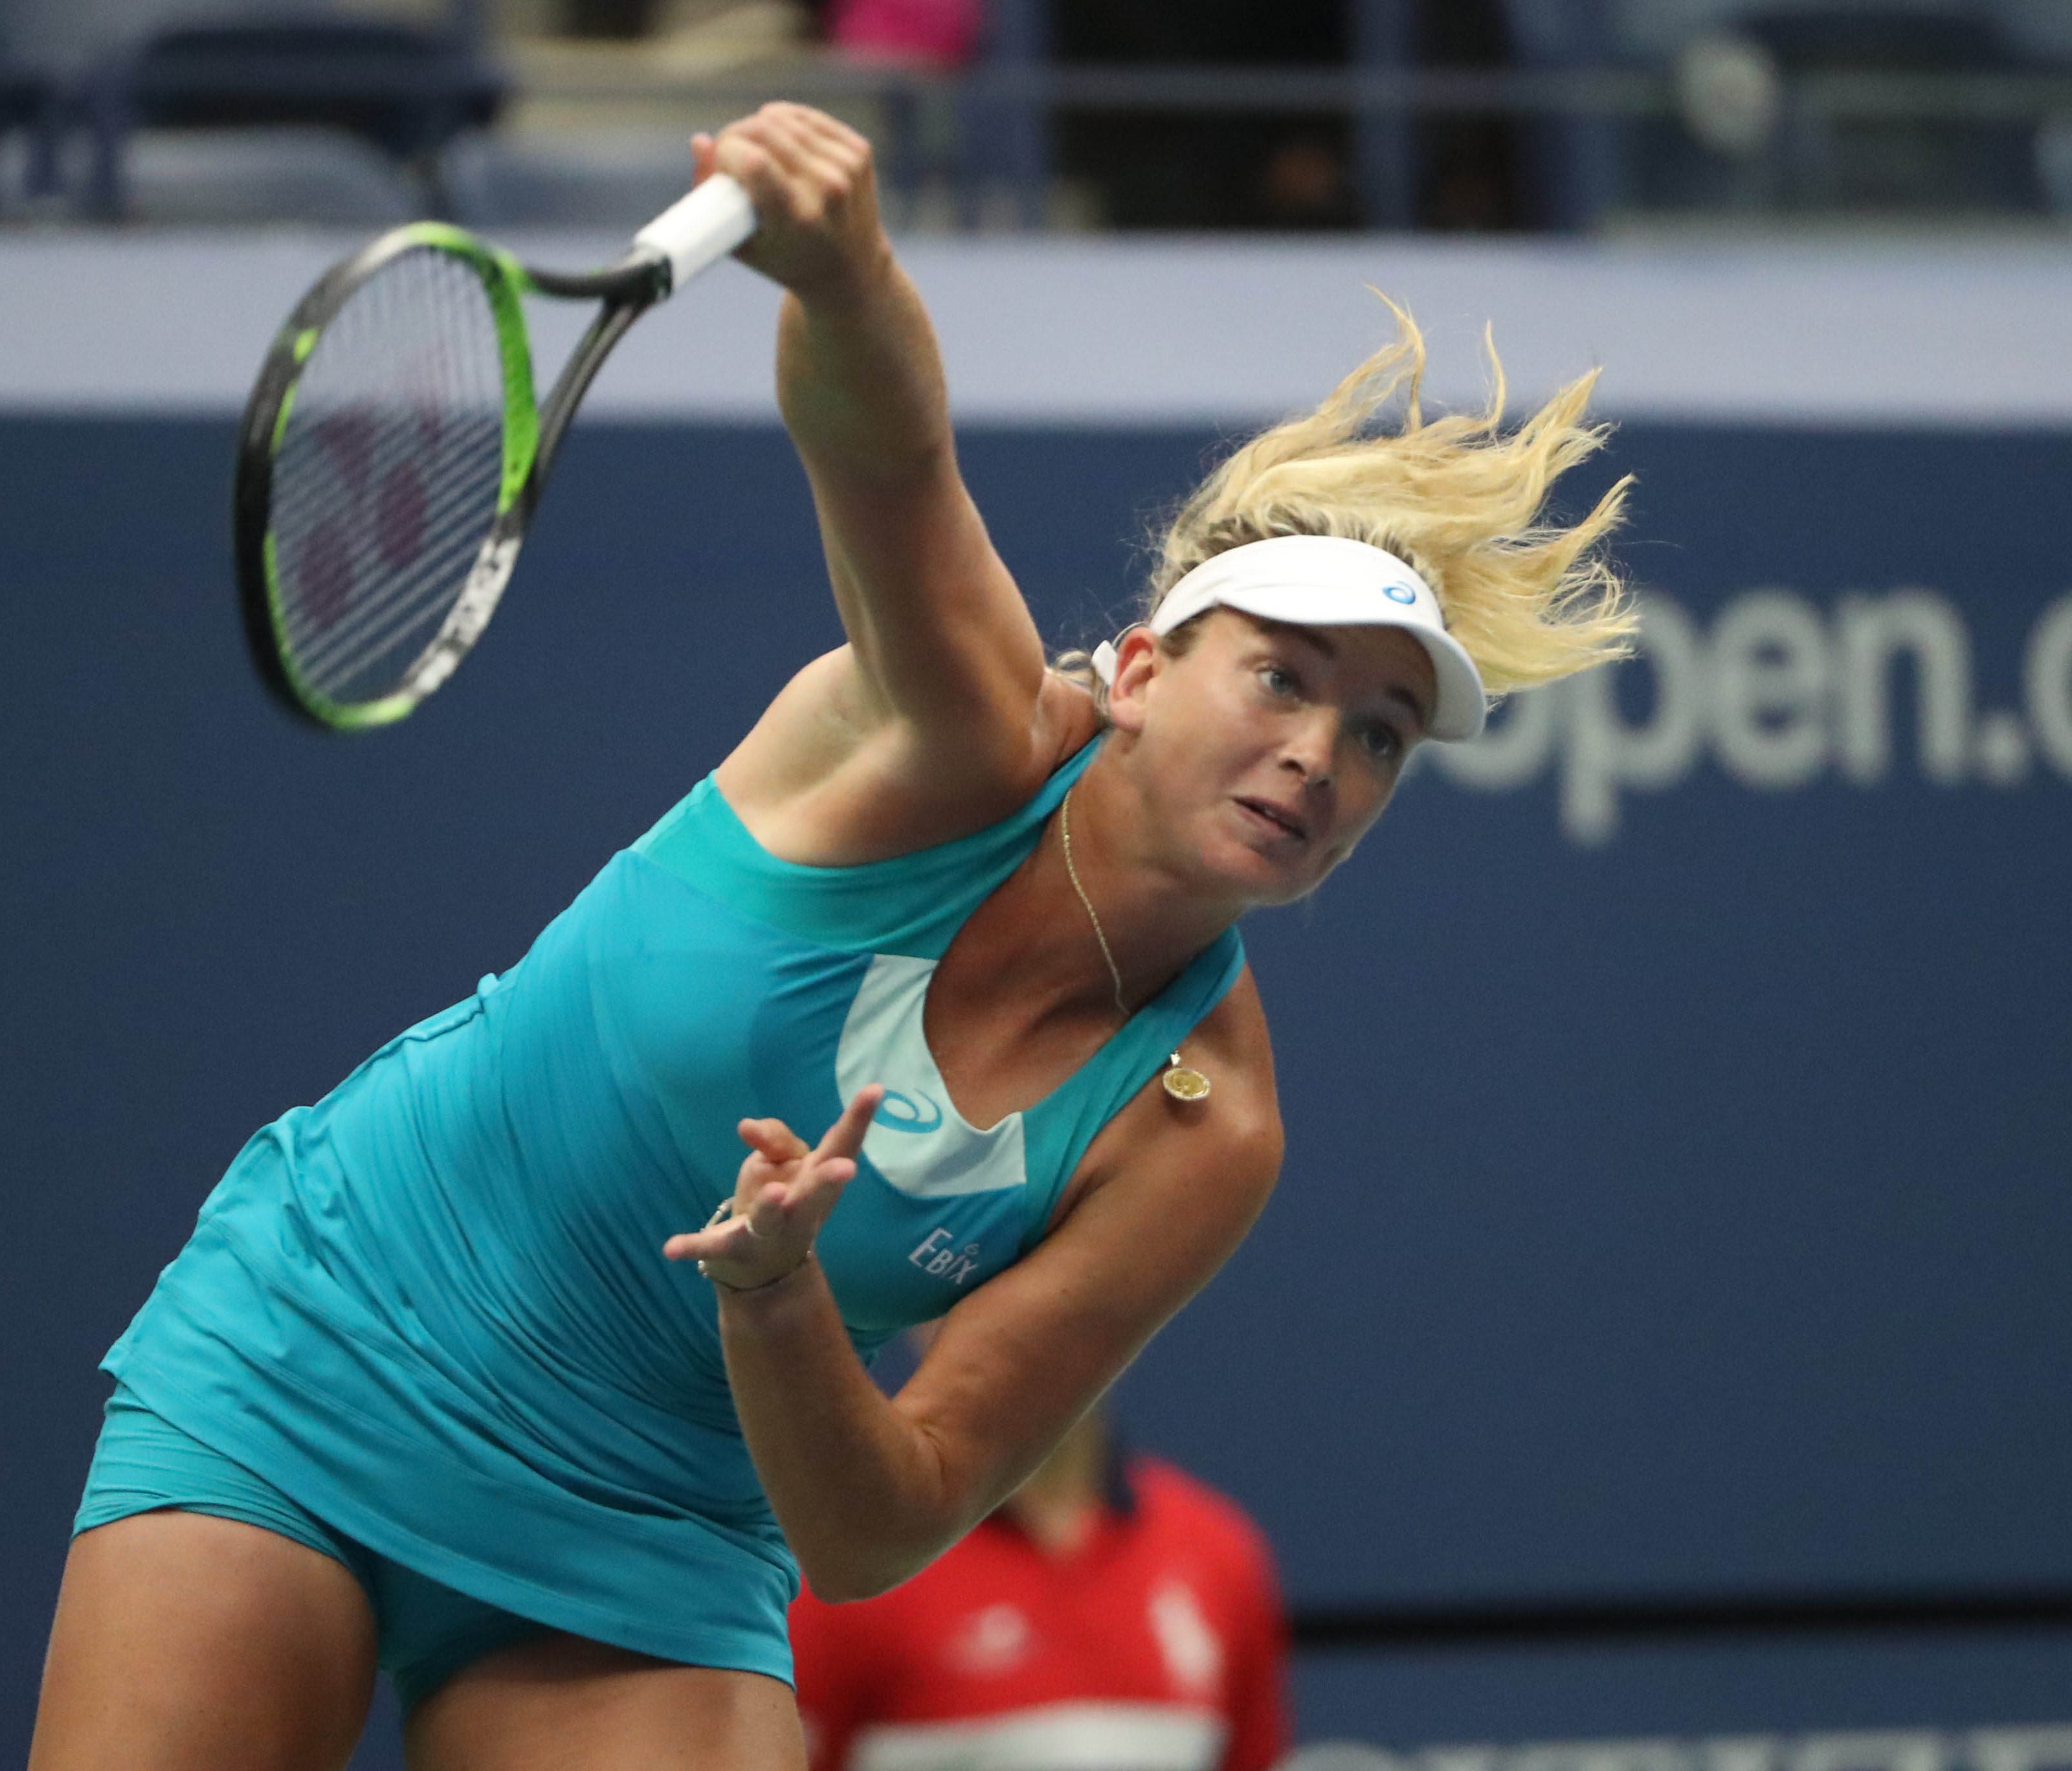 CoCo Vandeweghe of the United States serves to Karolina Pliskova of the Czech Republic during the U.S. Open at USTA Billie Jean King National Tennis Center on Sept. 6.